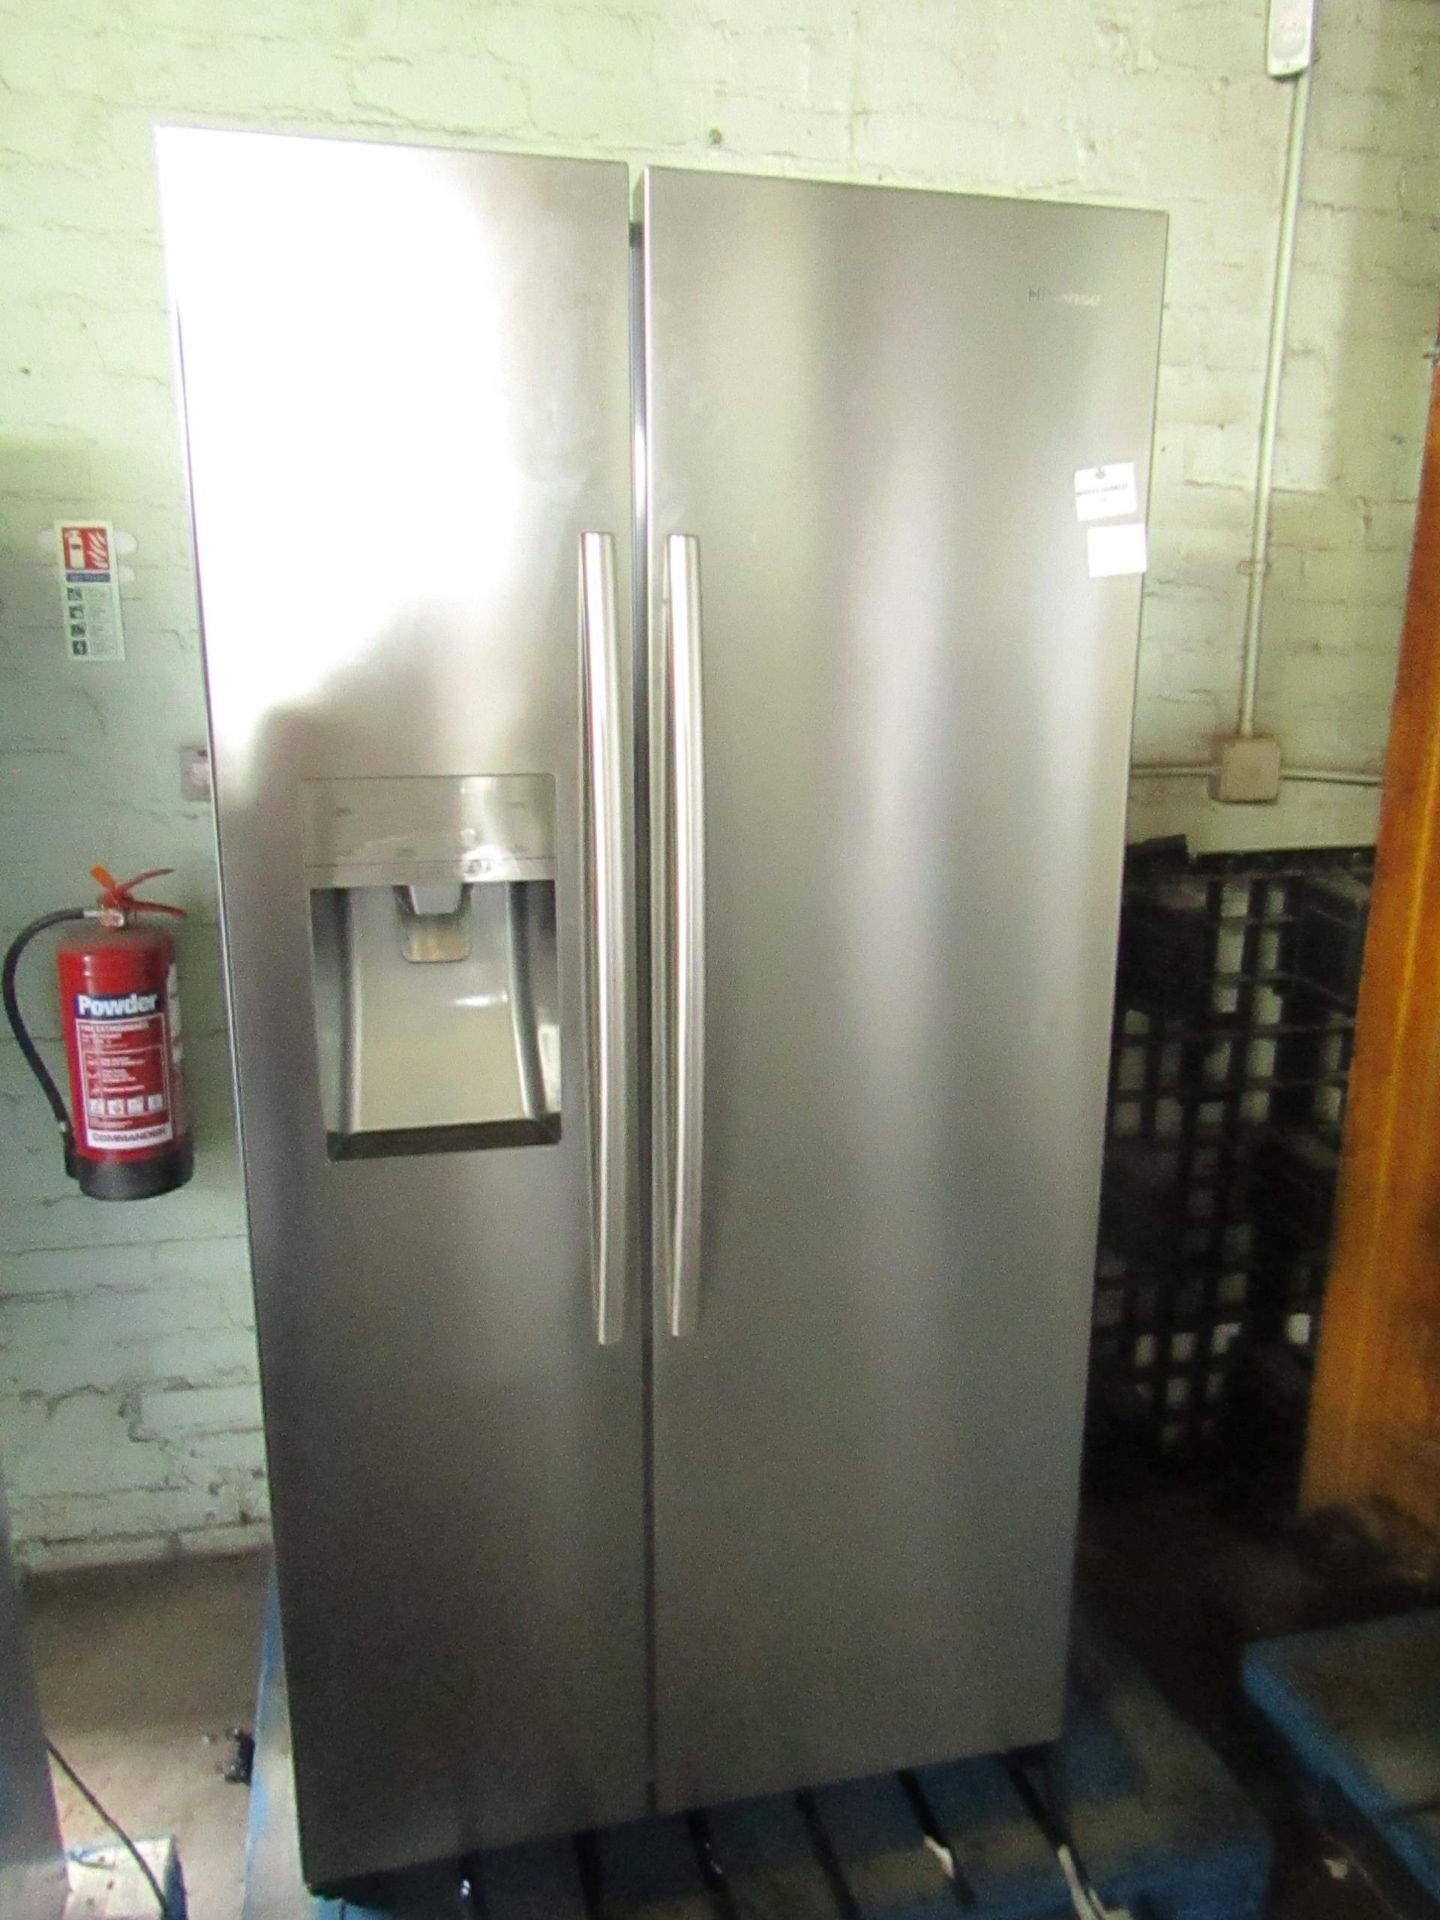 Hisense - RS694N4ICF - American Fridge Freezer - Stainless Steel - F Rated - Powers On & Cold Tested